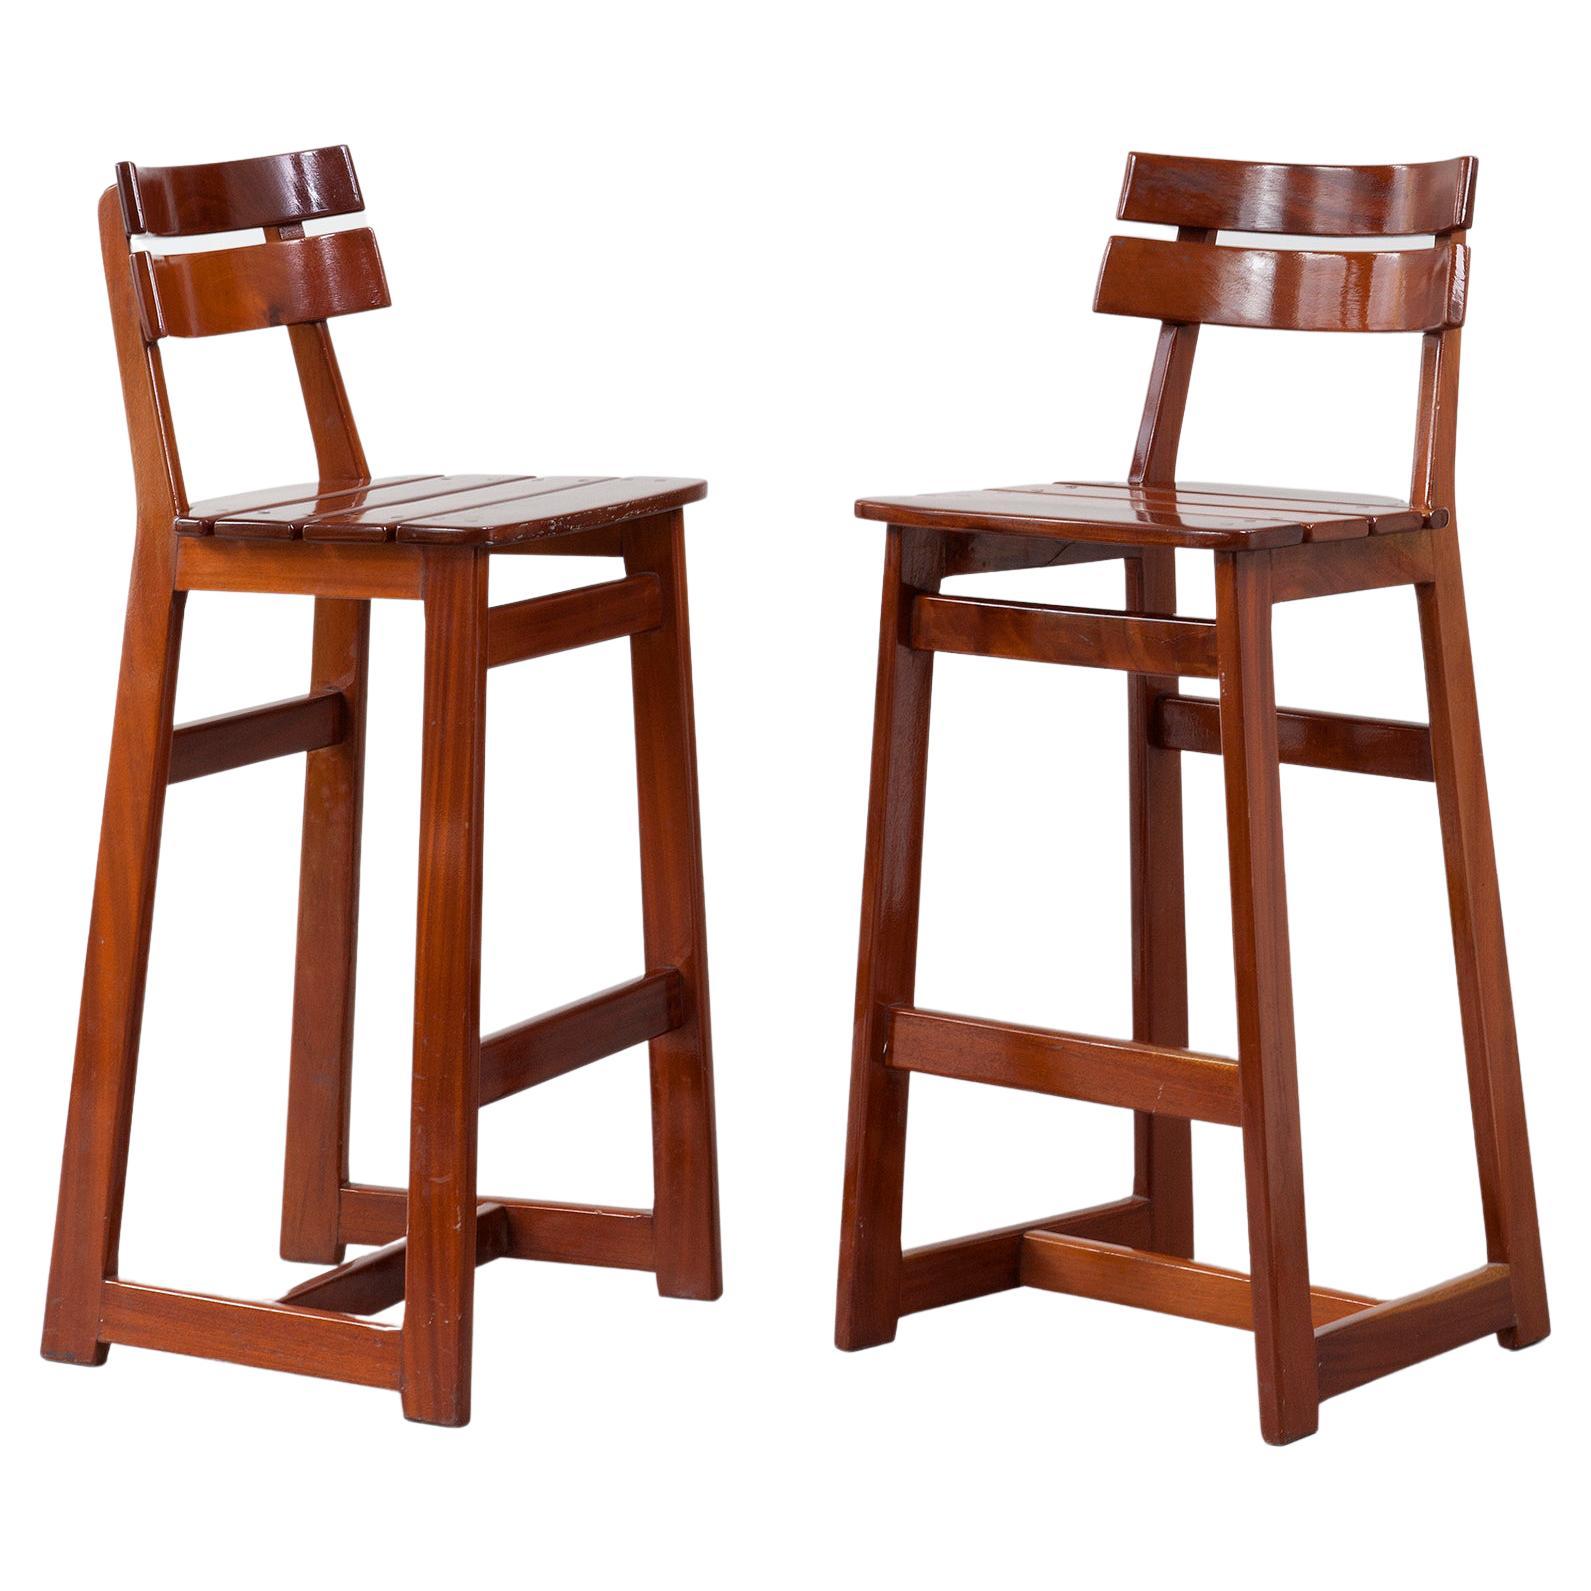 Pair of Barstools in Brazilian Mahogany by Sérgio Rodrigues For Sale